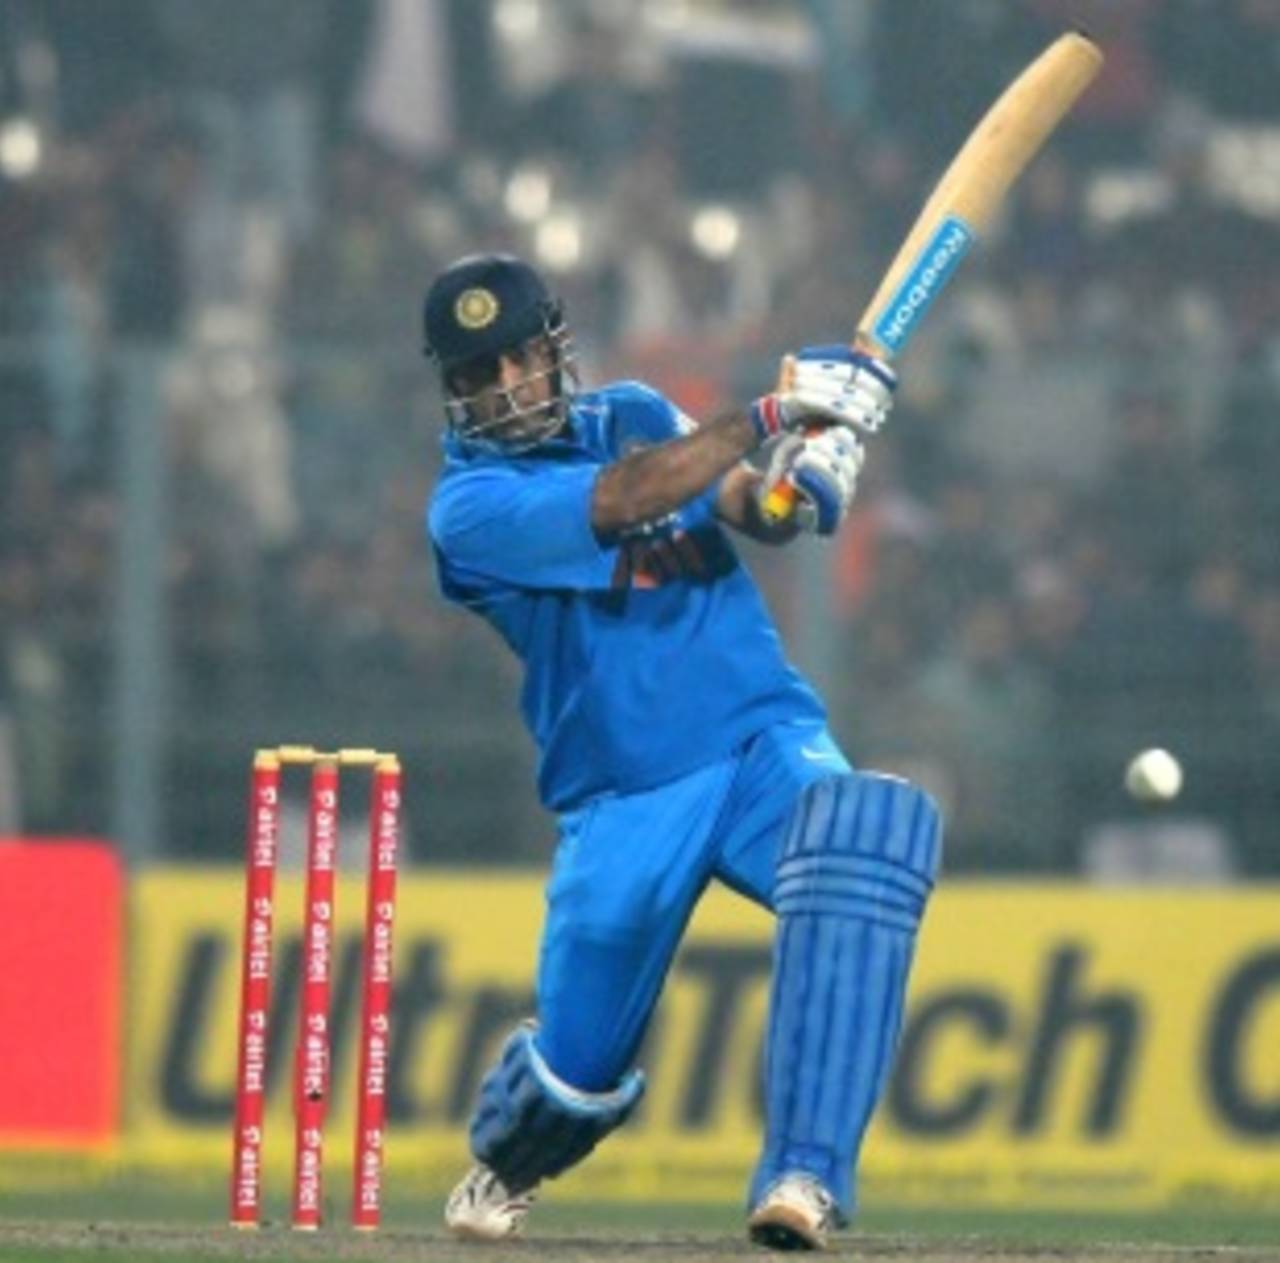 Sourav Ganguly on MS Dhoni: "It really baffles me, somebody so gifted under-using his talent"&nbsp;&nbsp;&bull;&nbsp;&nbsp;BCCI